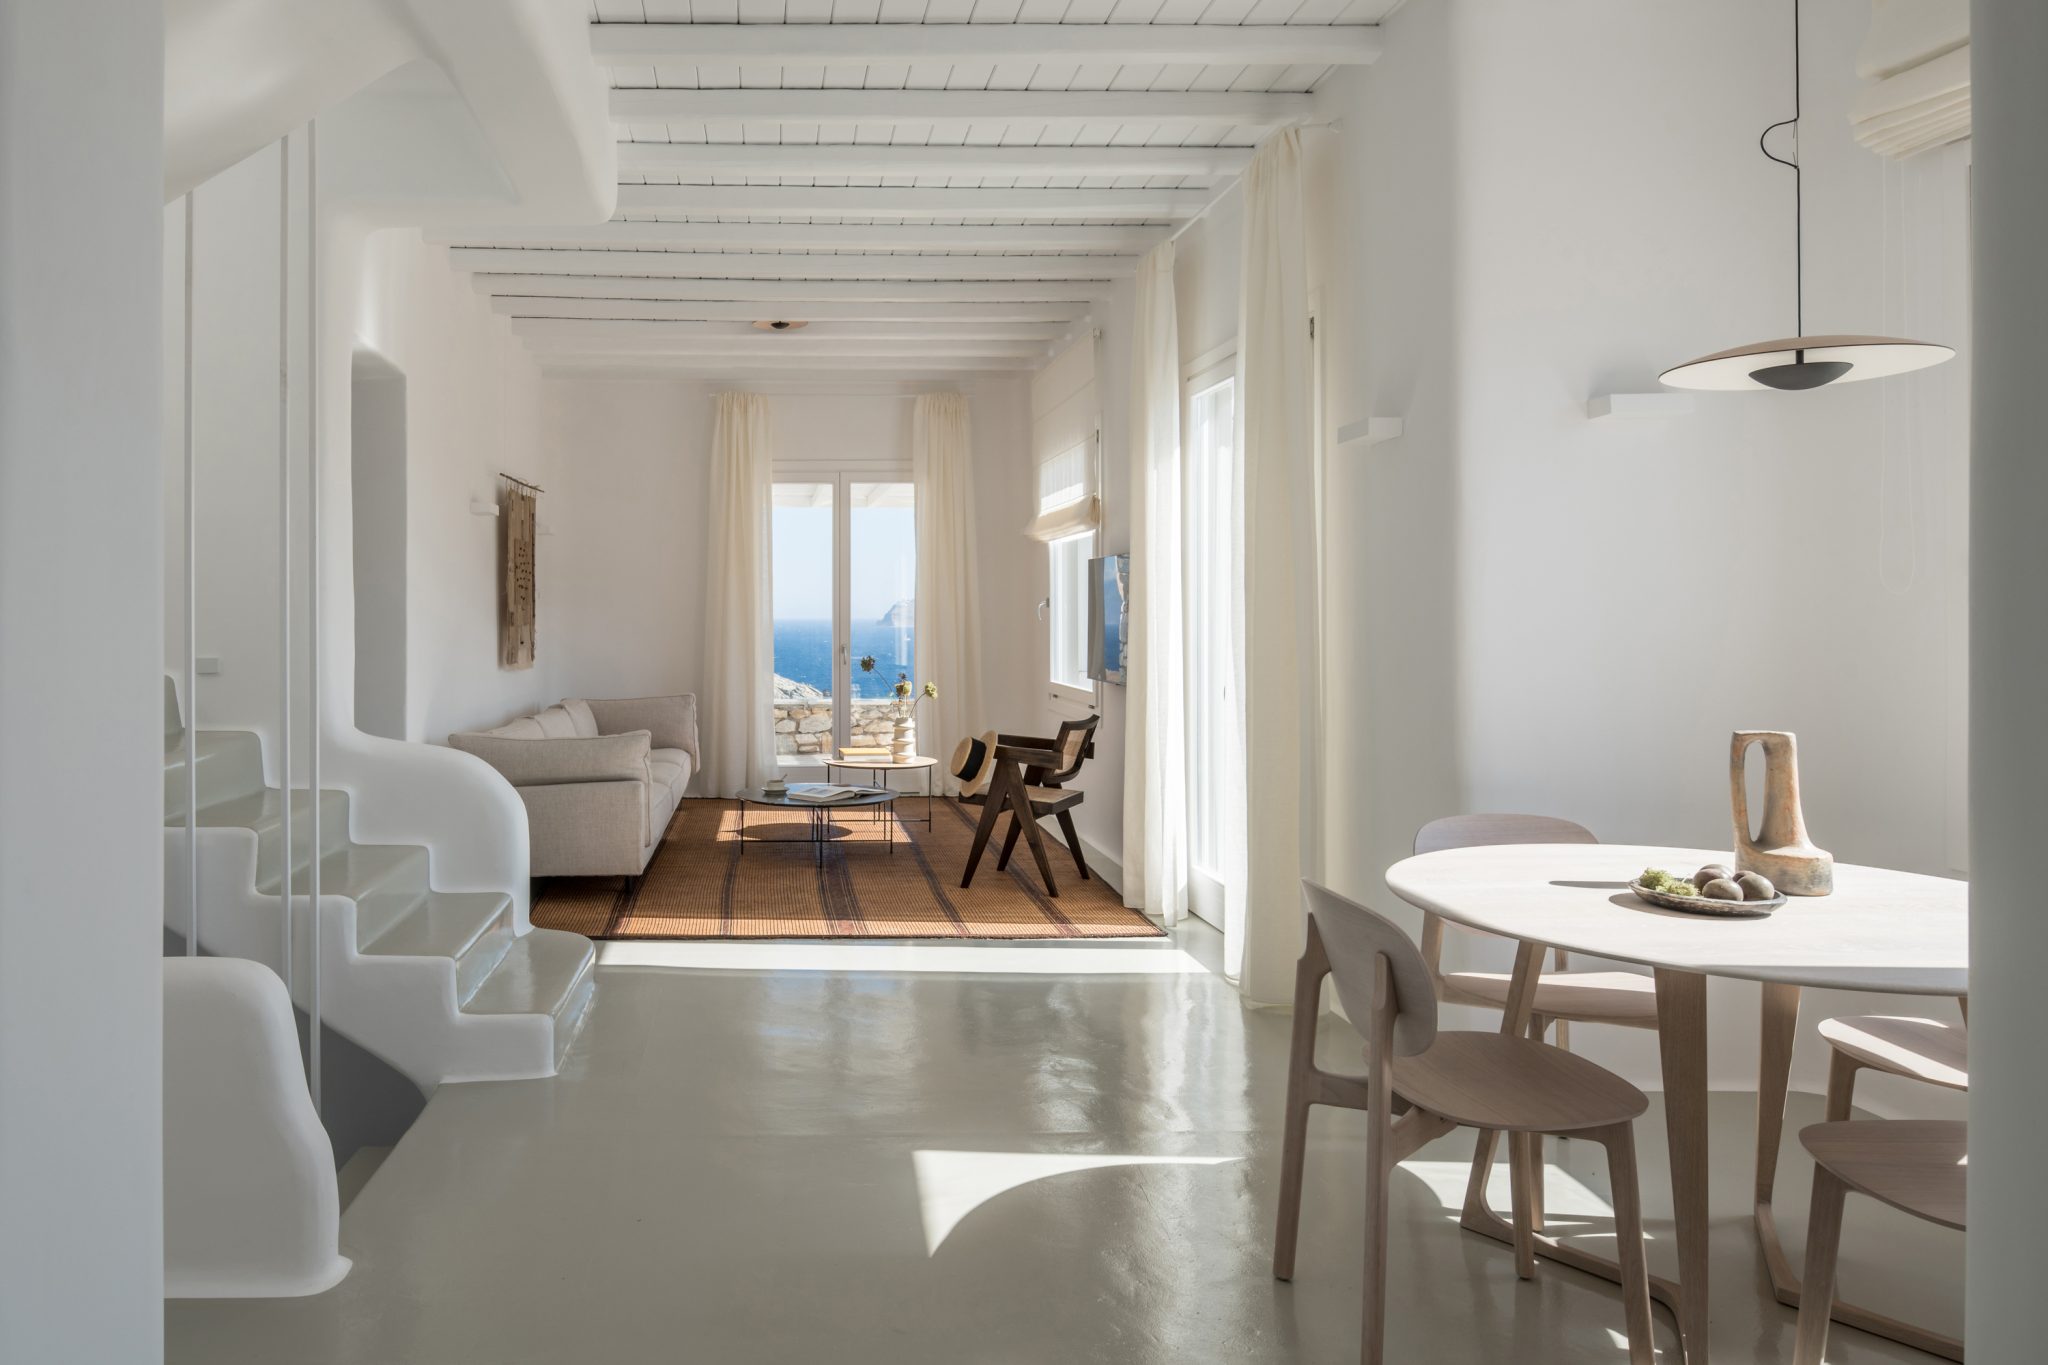 Villa Pantheon in Kanalia-mykonos available for rent by Presidence